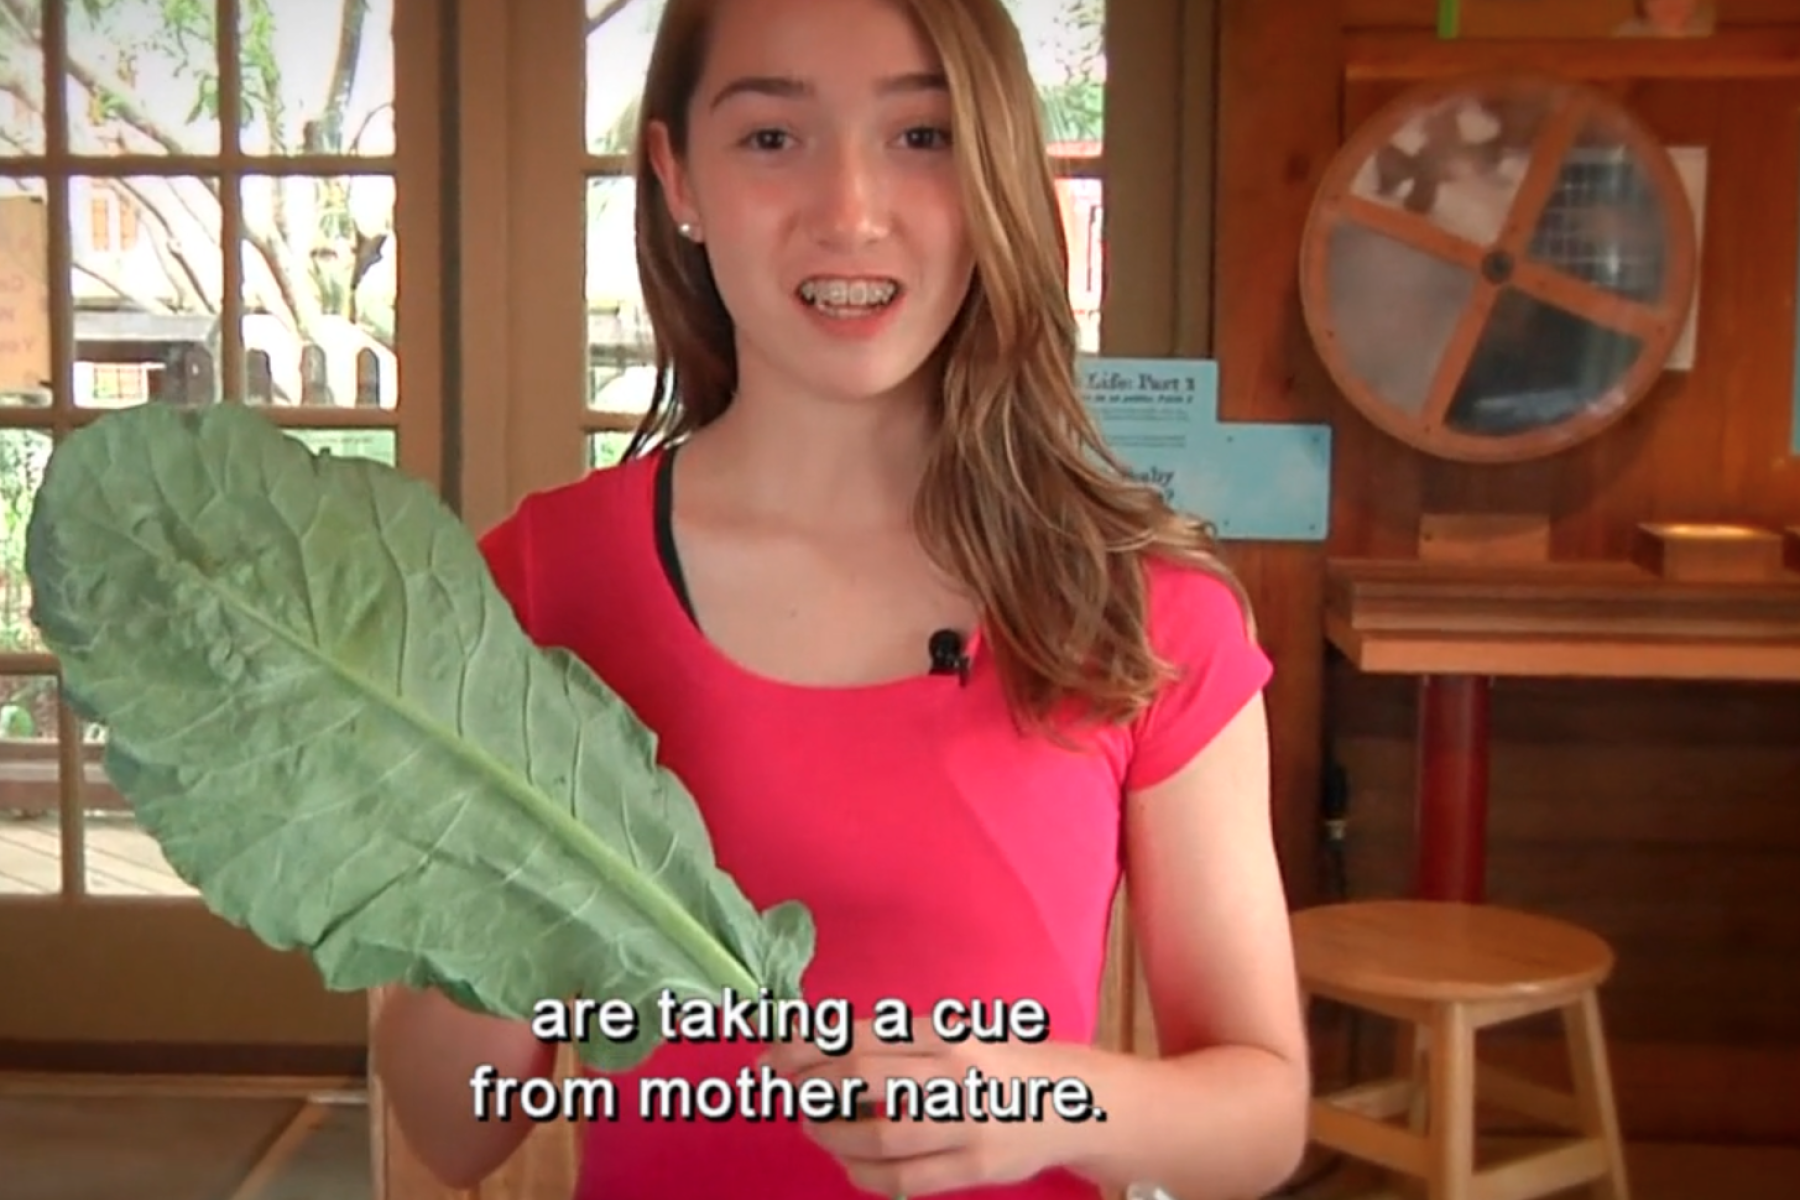 Teen girl with braces in a pink shirt holds a large kale leaf